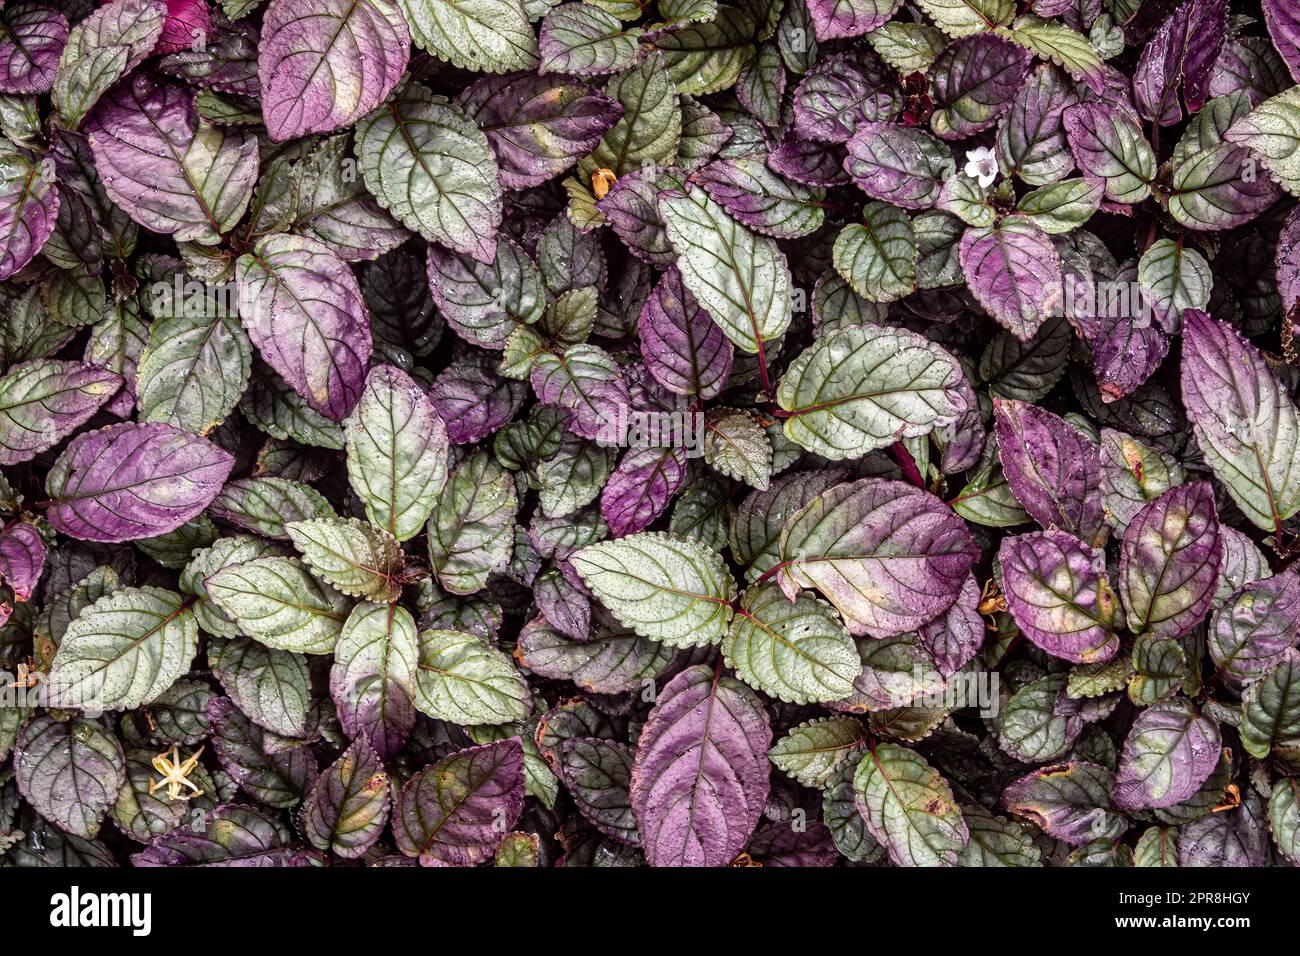 Plectranthus ciliatus is a herbaceous plant, belongs to the Lamiaceae family, native to tropical Africa. Leaf of green and purple color. Top view. Stock Photo